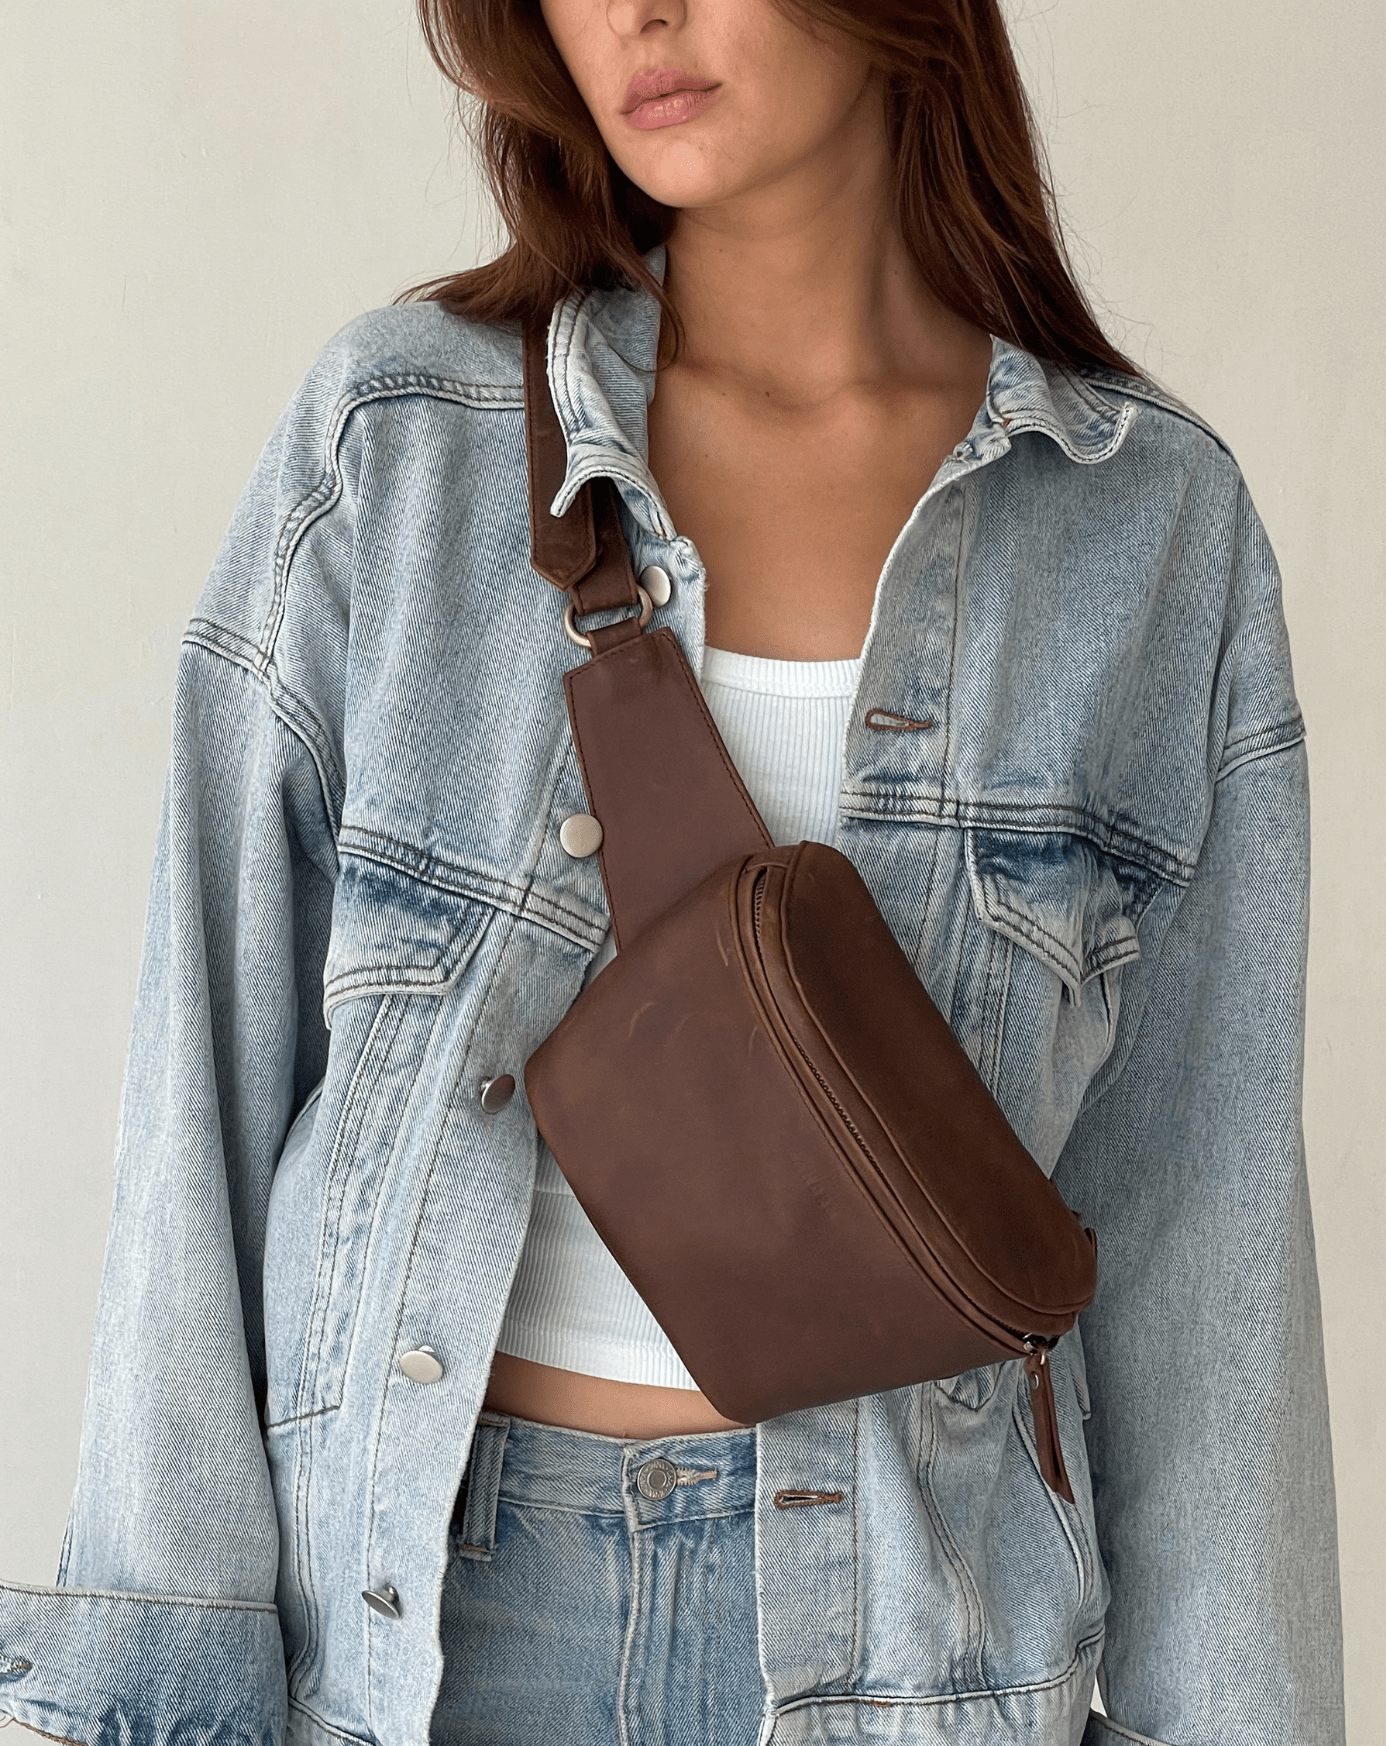 MANDRN  The Remy- Taupe Leather Fanny Pack